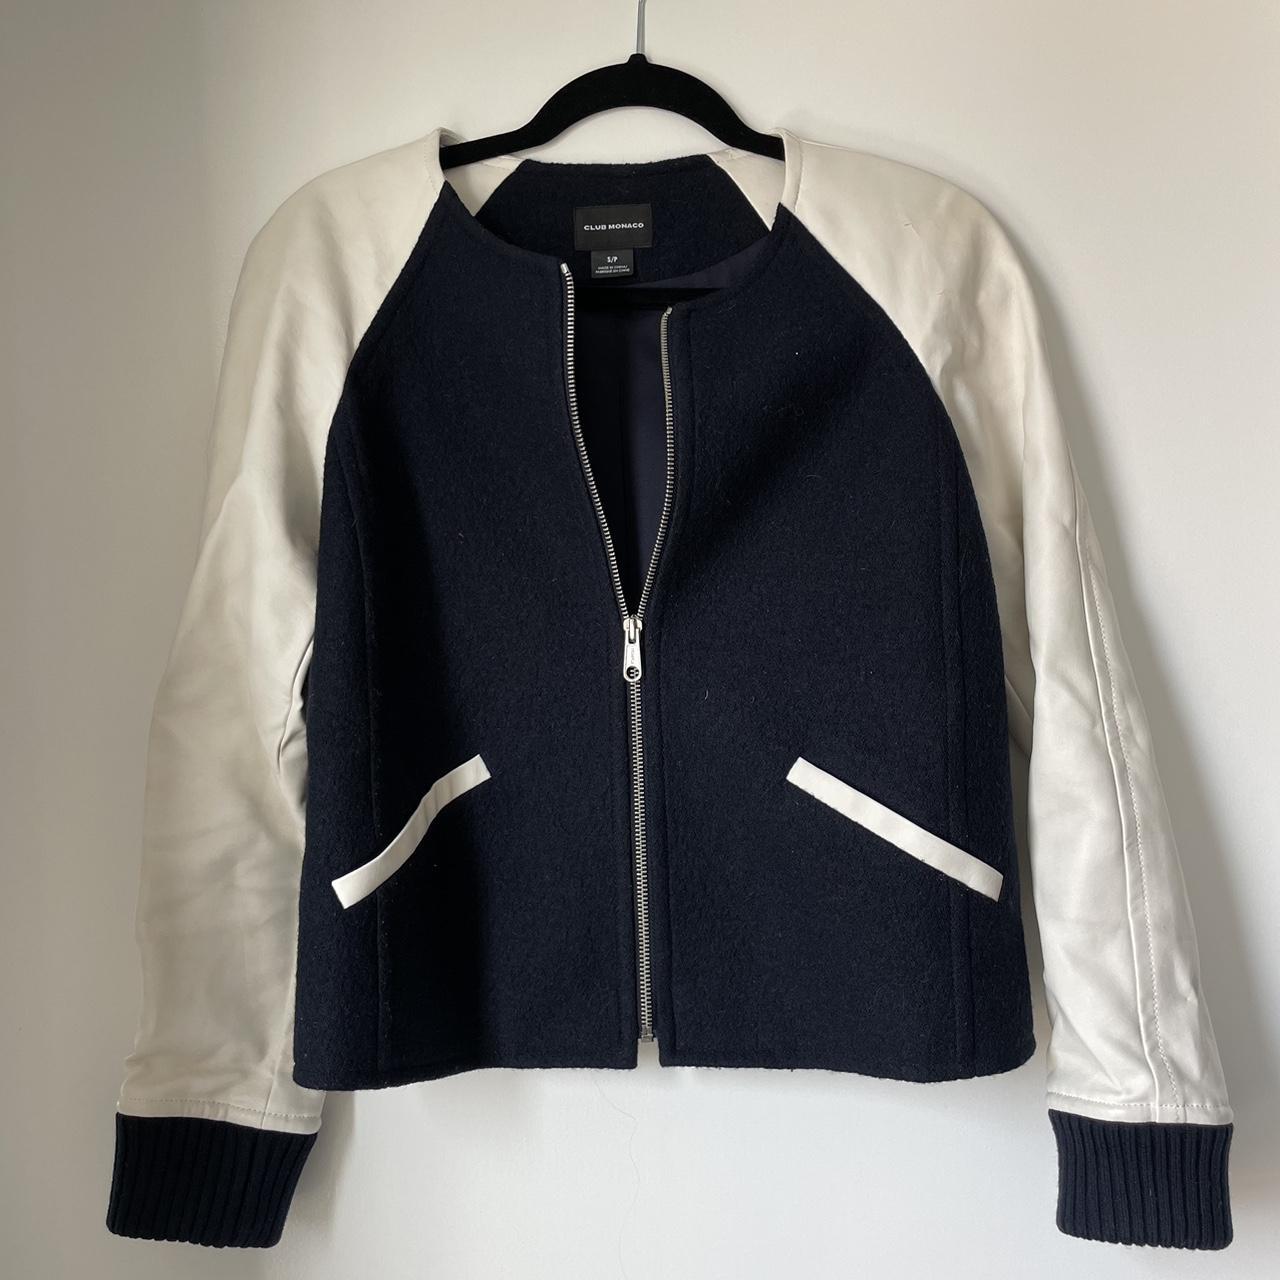 Navy Blue and White Varsity Jacket with Leather Sleeves